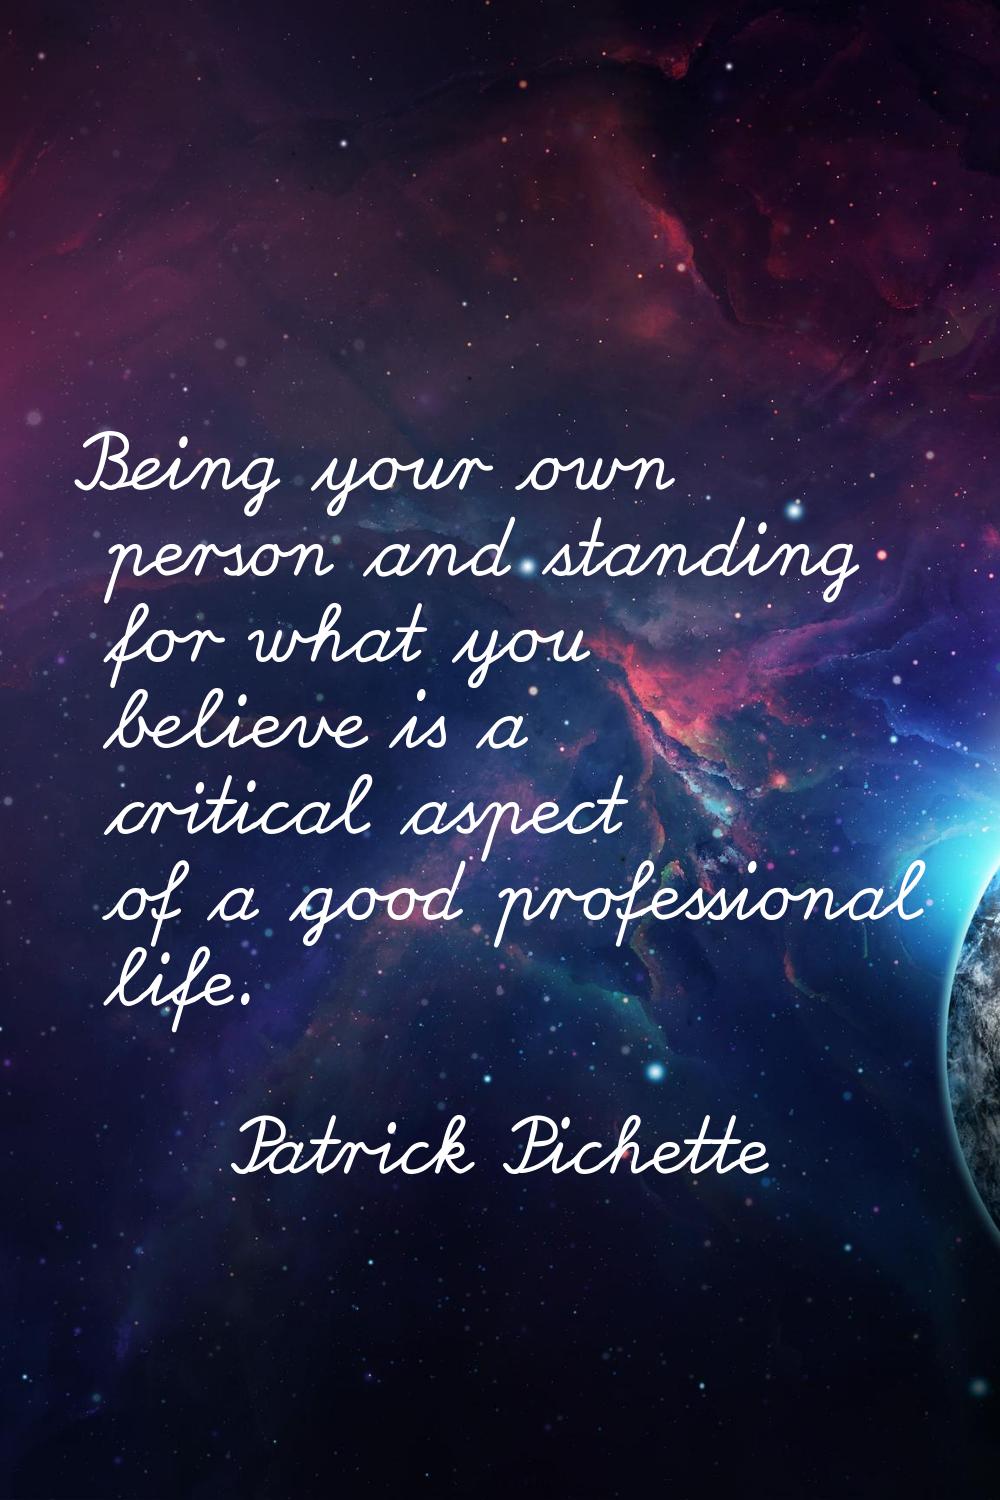 Being your own person and standing for what you believe is a critical aspect of a good professional